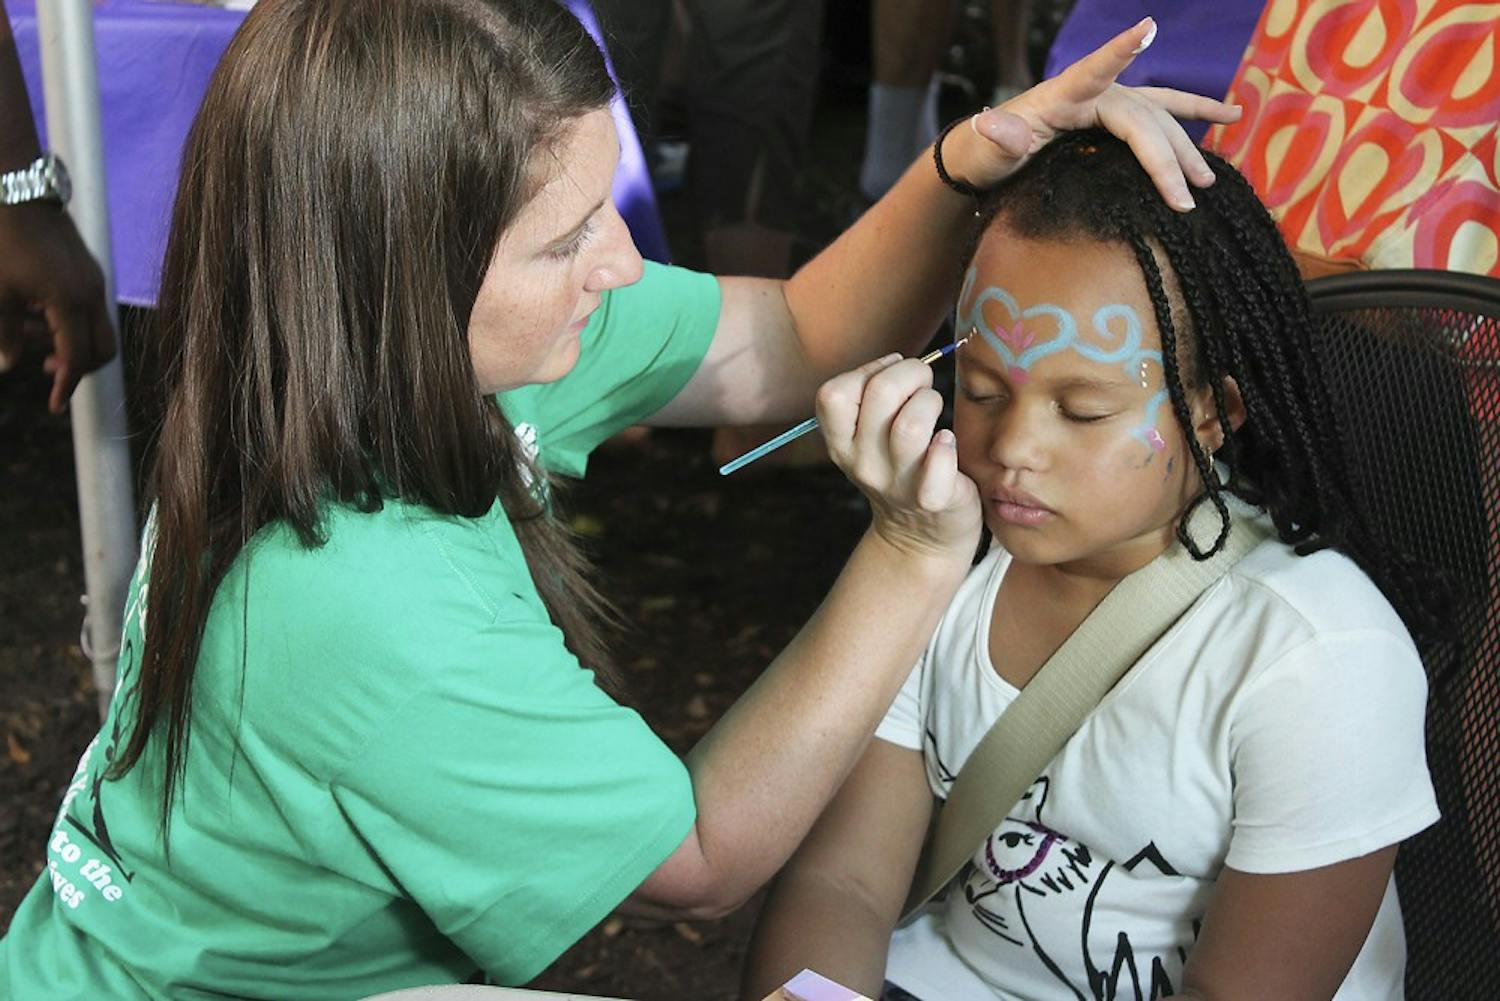 Laila Williams, eight years old, gets her face painted at the Weaver Street Co-Op Fair in Carborro.